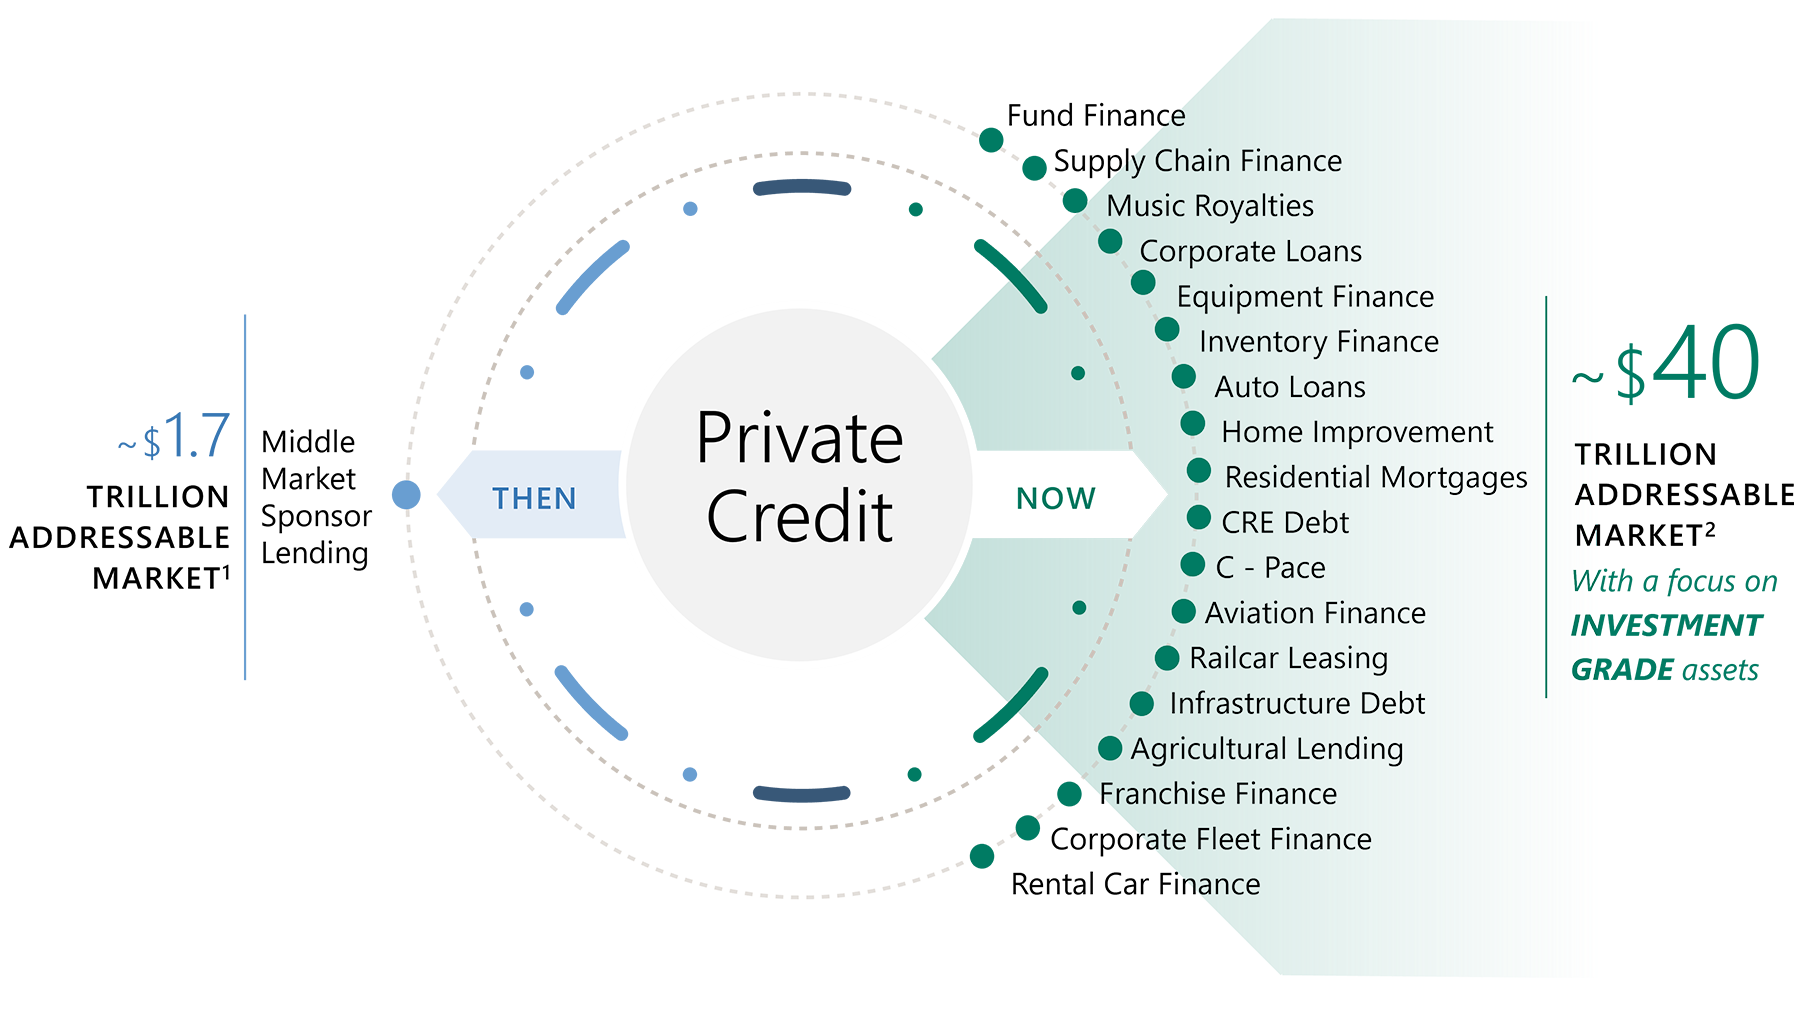 Graphic illustrating how the opportunity in Private Credit has expanded over time by displaying a comparison of "Then" and "Now". Then: Private Credit was an approximately $1.7 trillion addressable market that included only Middle Market Sponsor Lending. Now: Private Credit is an approximately $40 trillion addressable market with a focus on  Investment Grade assets. The “Now” section of the graphic includes 17 different types of Private Credit including Fund Finance, Supply Chain Finance, Music Royalties, Corporate Loans, Equipment Finance, Inventory Finance, Auto Loans, Home Improvement, Residential Mortgages, CRE Debt, C – Pace, Aviation Finance, Railcar Leasing, Infrastructure Debt, Agricultural Lending, Franchise Finance, Corporate Fleet Finance, and Rental Car Finance.